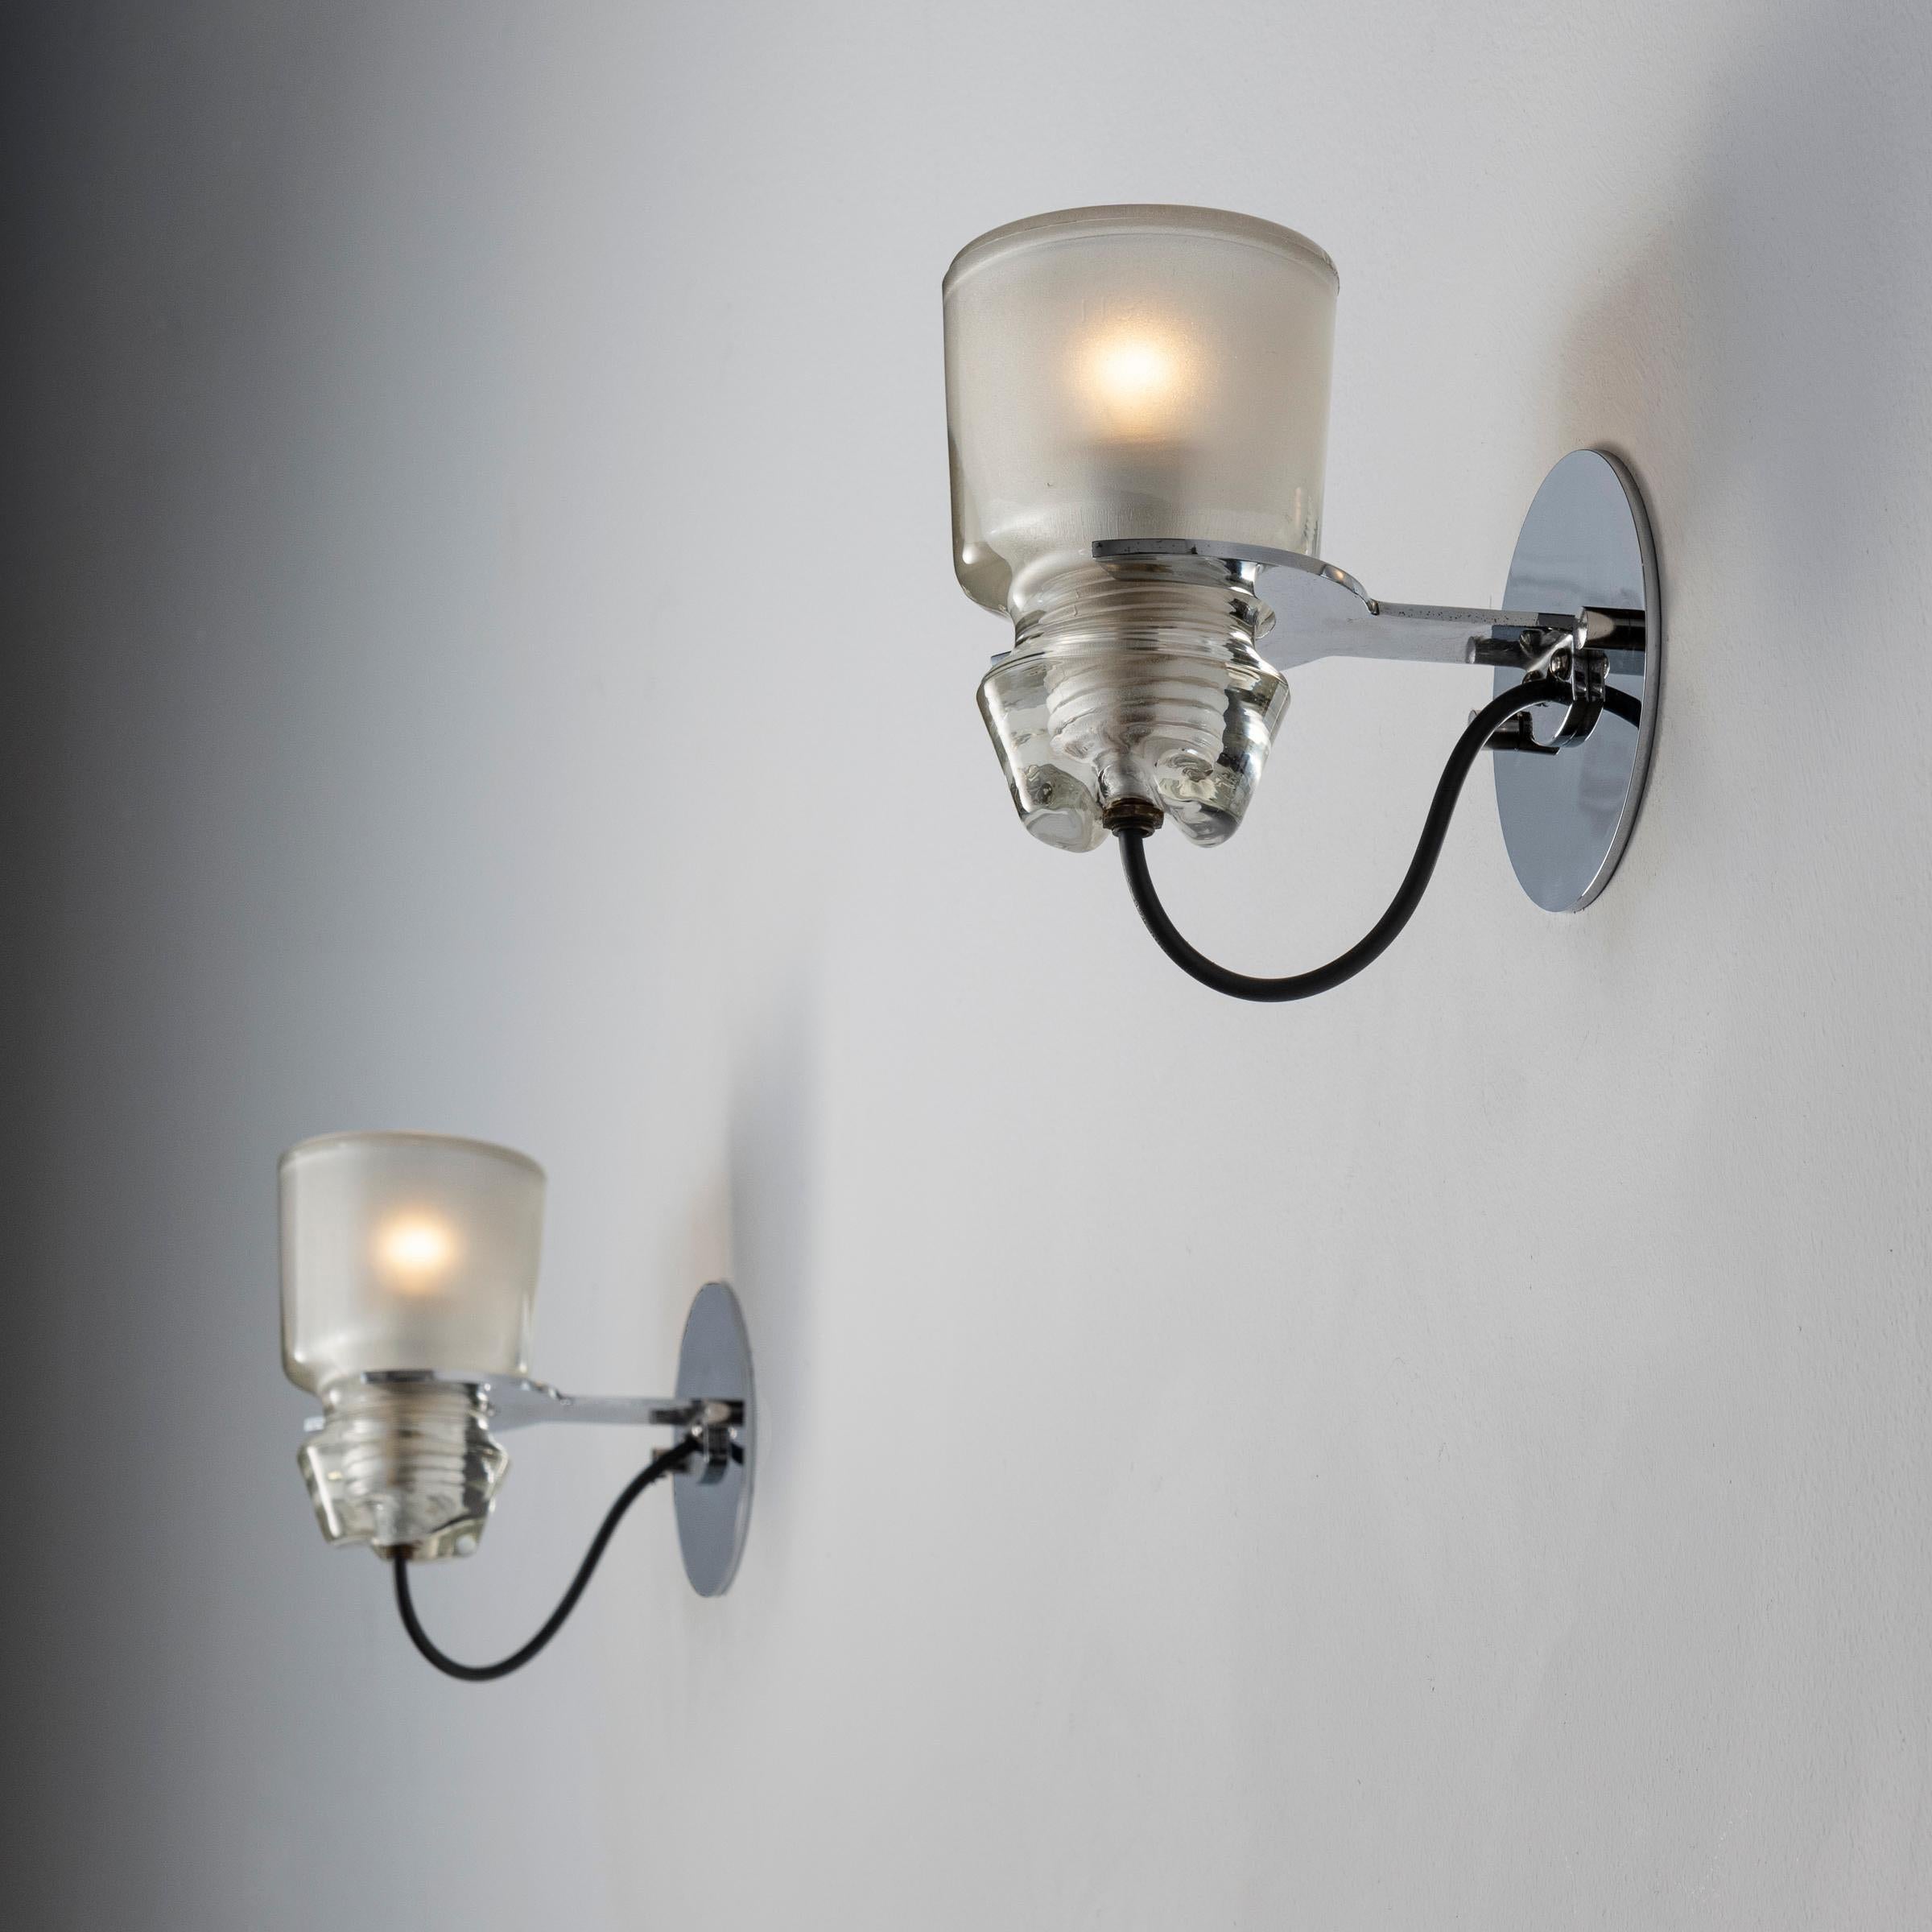 Two Model 1132 sconces by Marco Zanuso for Oluce. Designed and manufactured in Italy, circa 1960's. Crystal glass, custom chrome backplates. WIred U.S. standards. We recommend one E14 60w maximum candelabra bulbs per socket. Bulbs not included.